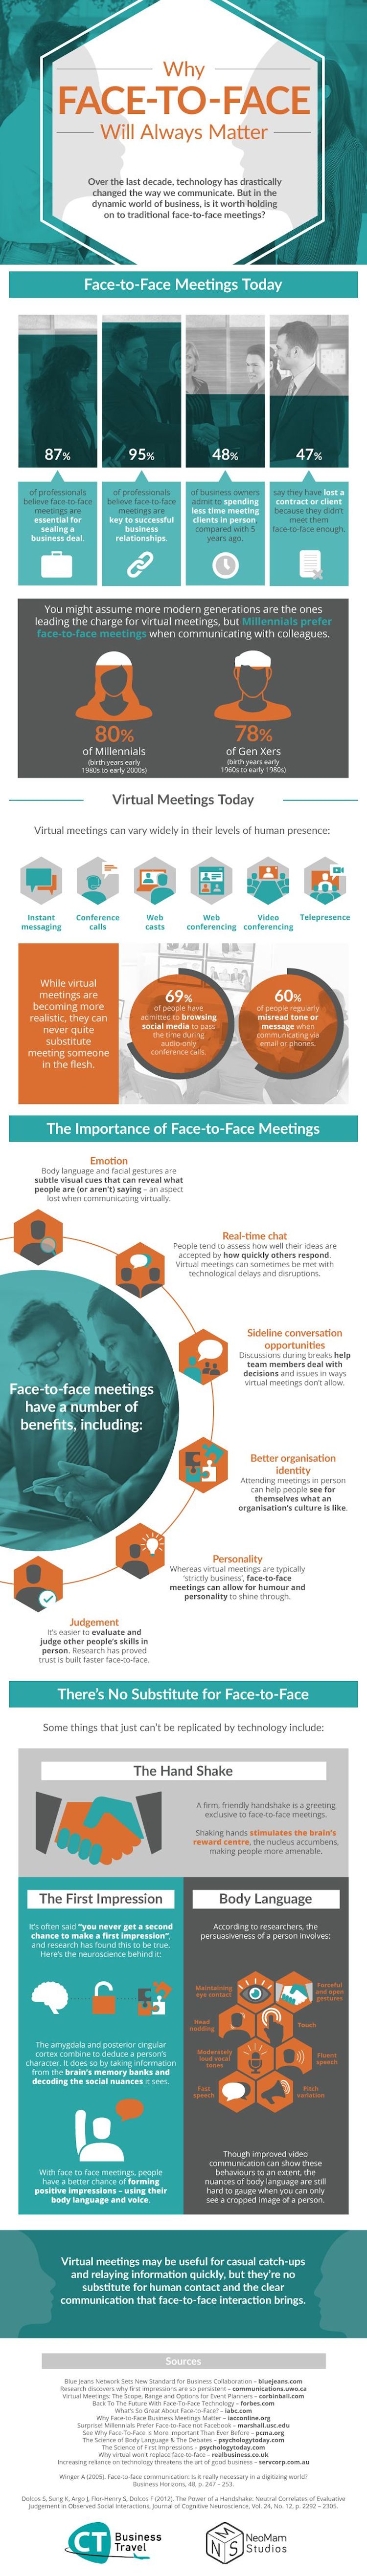 Face to Face Meeting Infographic